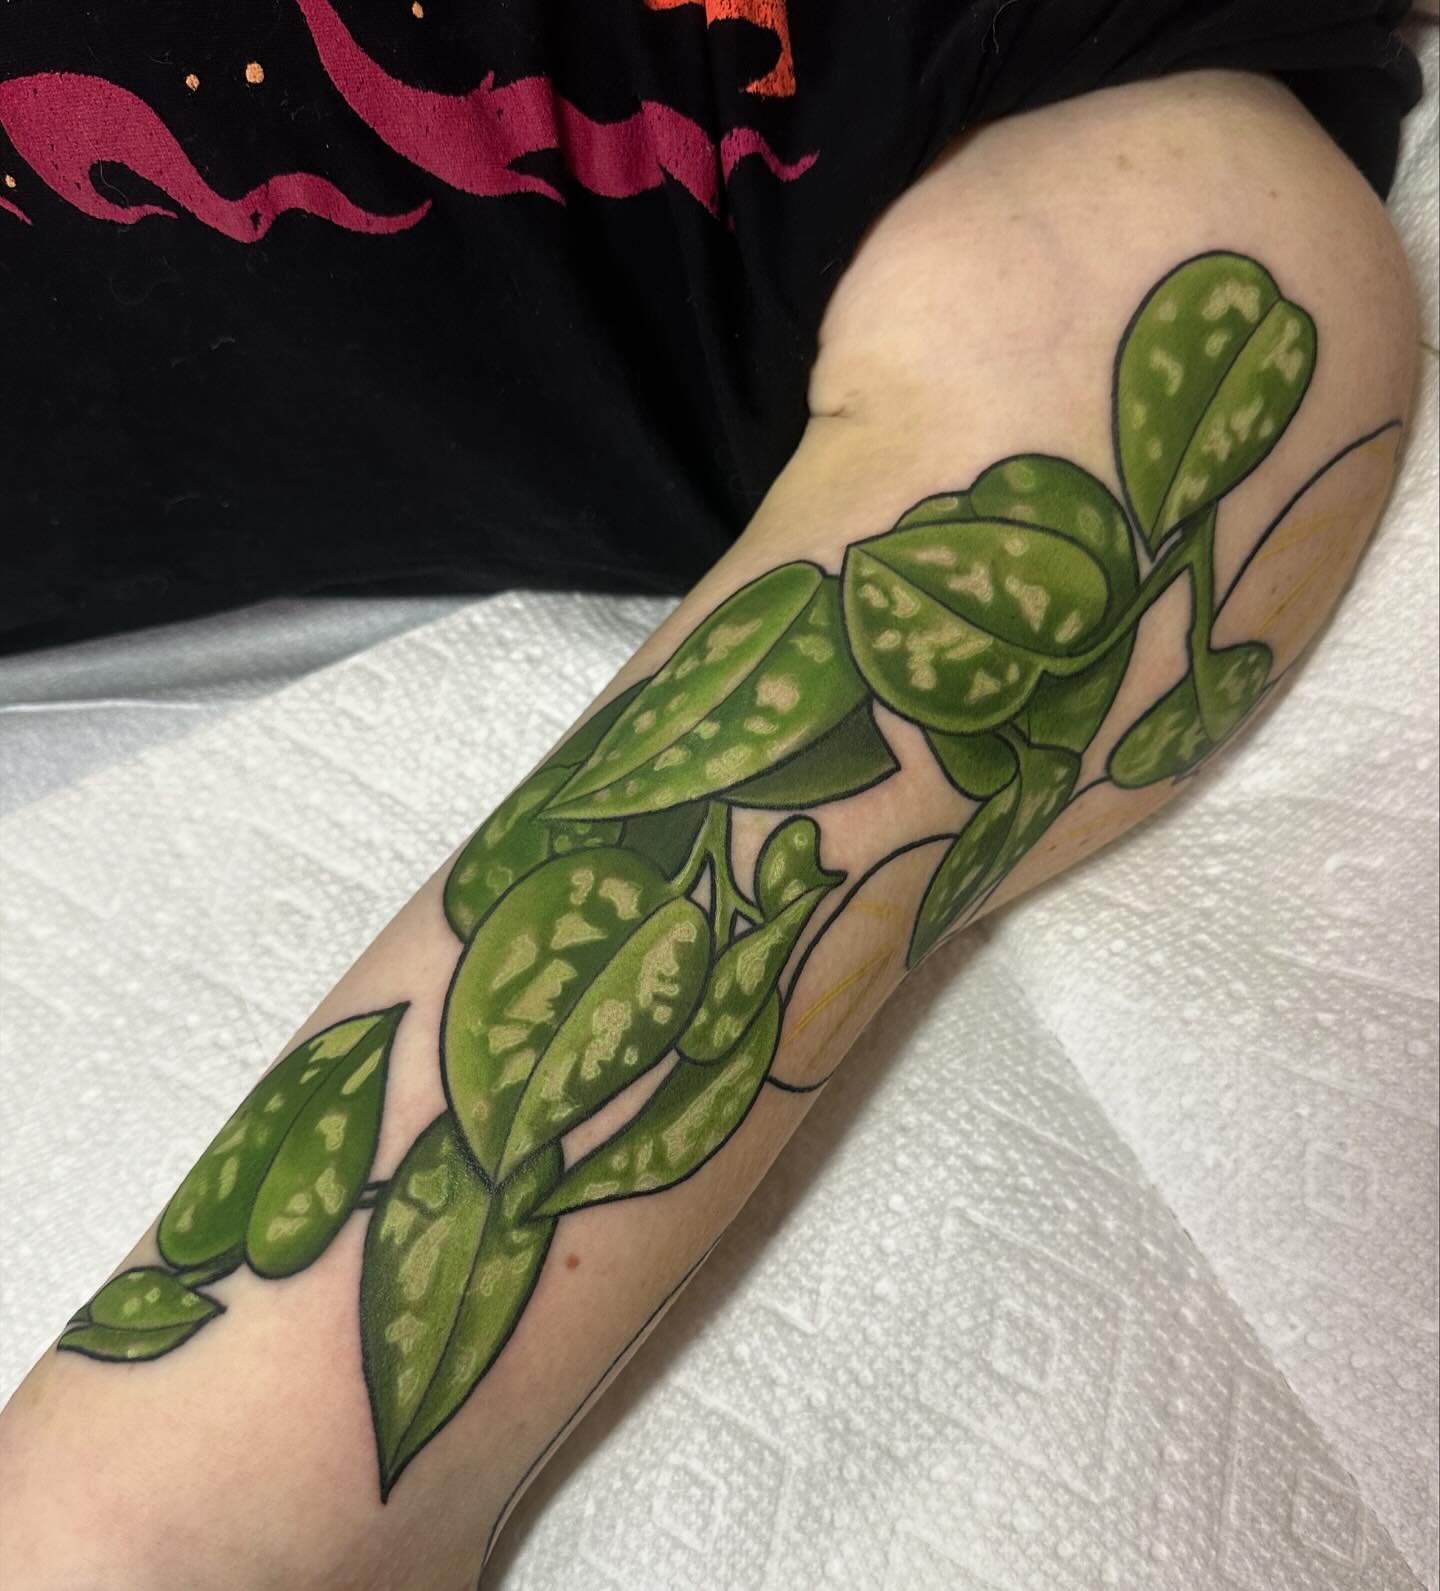 Progress on Rachel&rsquo;s houseplant sleeve! Scindapsus Exotica. 

I&rsquo;m slowly learning how to keep my stamina up during large projects! If you have tips for how you get through long hours of focus, drop them in the comments, please! 
.
.
.
.
.